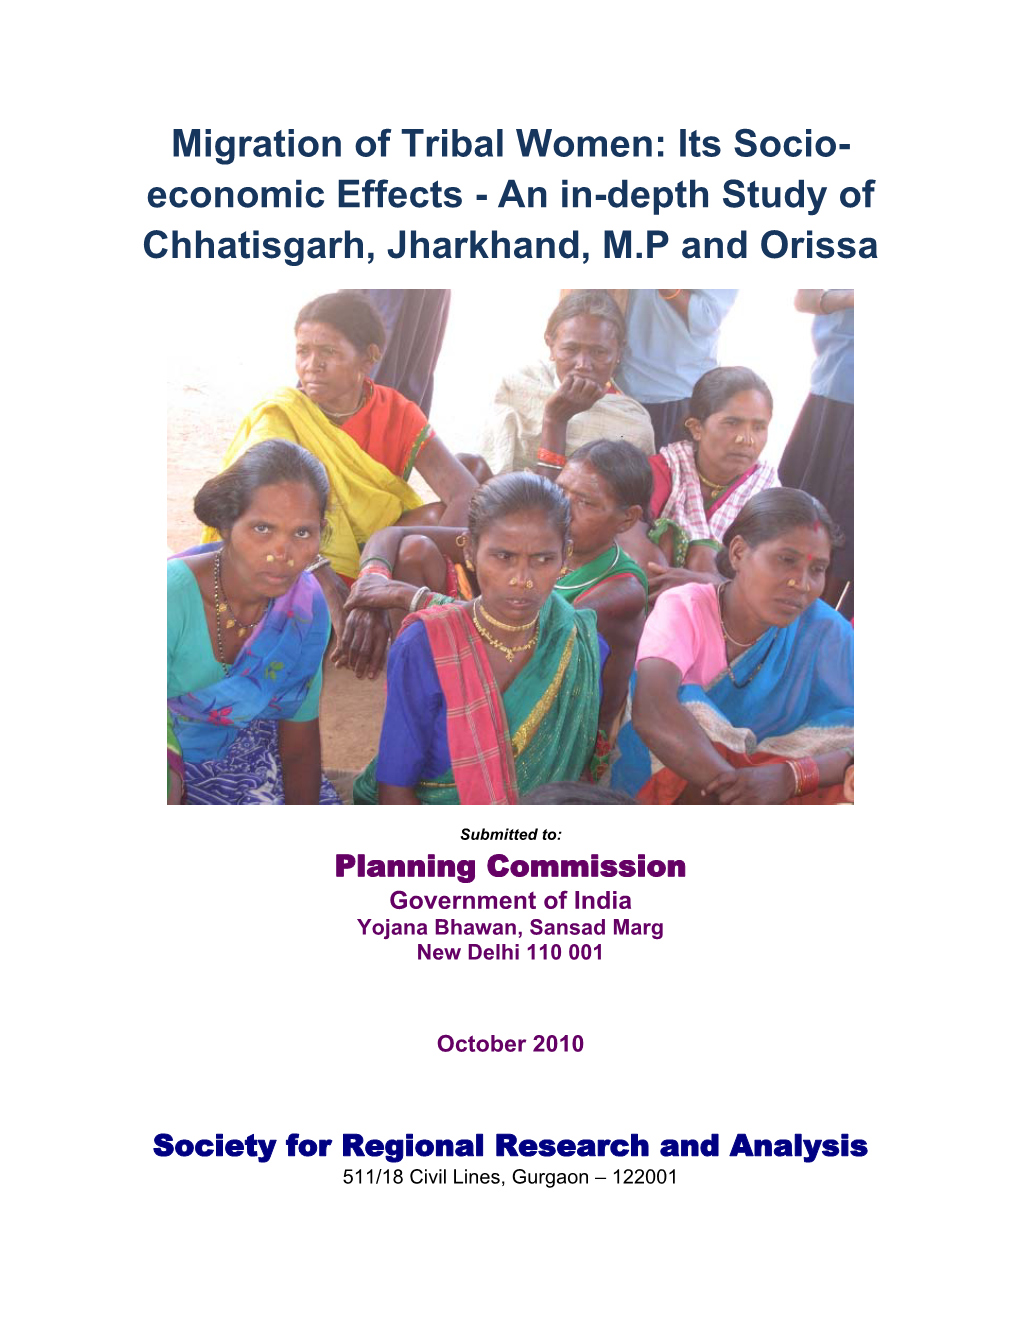 Migration of Tribal Women: Its Socio- Economic Effects - an In-Depth Study of Chhatisgarh, Jharkhand, M.P and Orissa